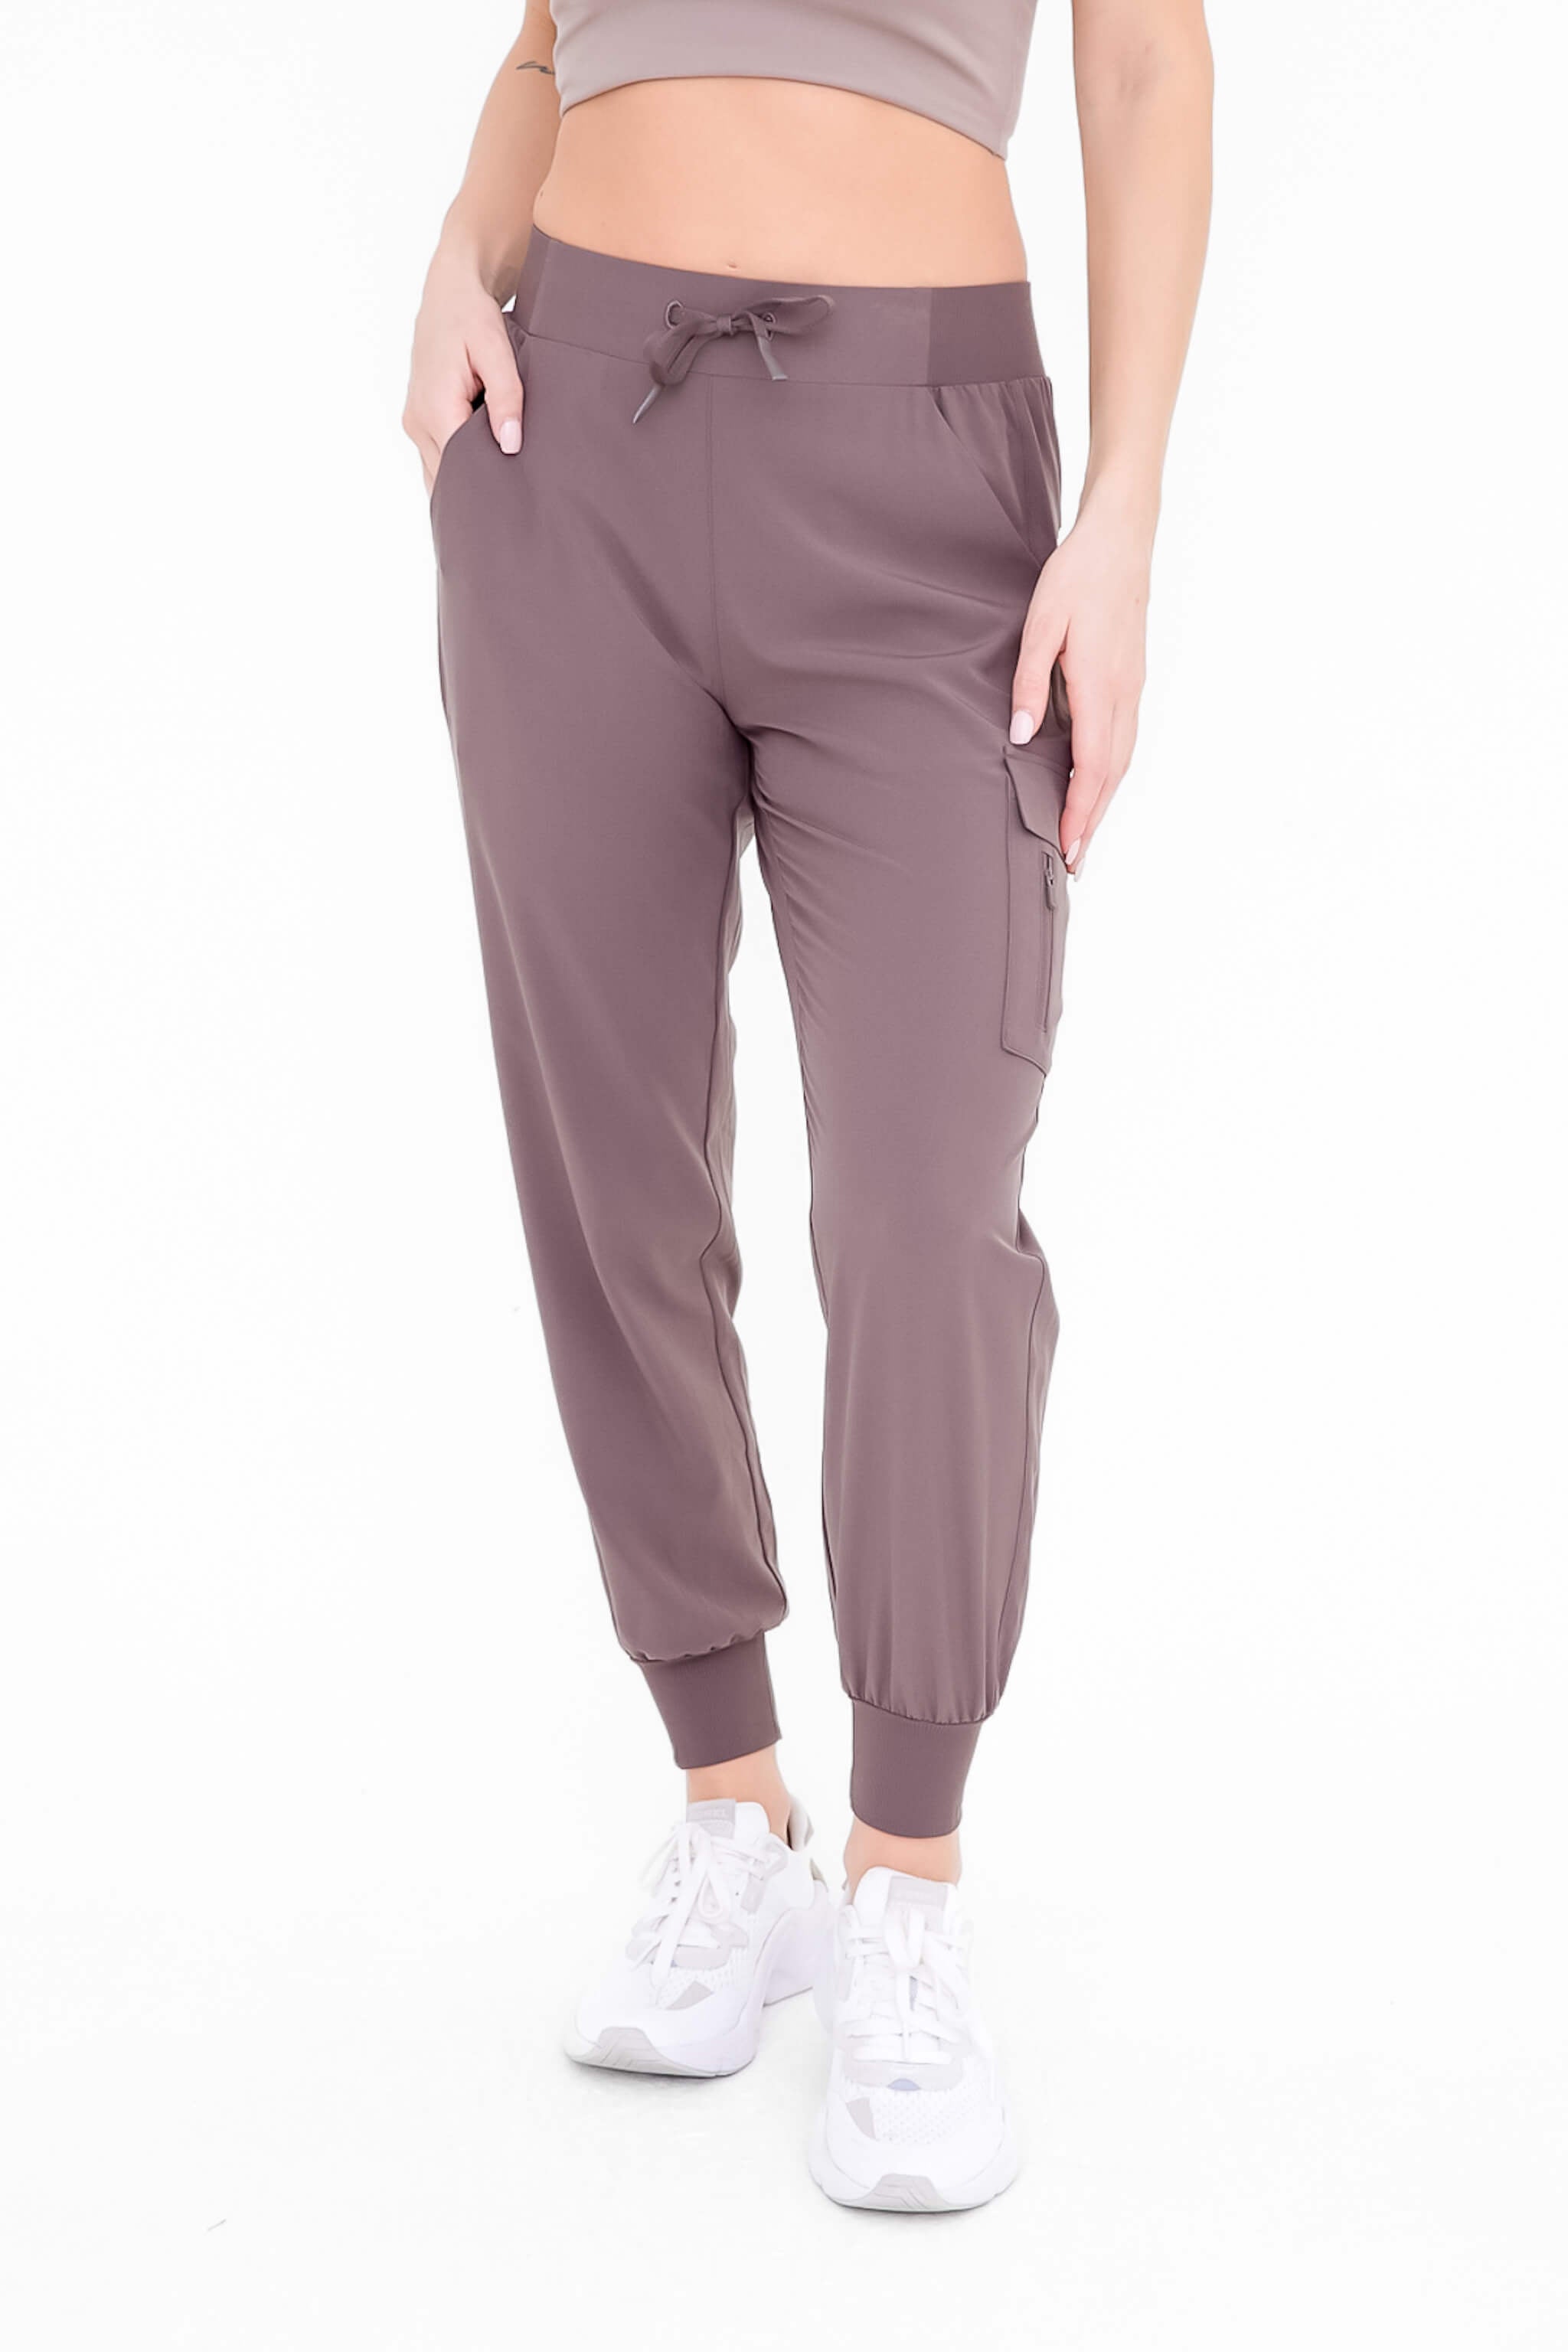 Piped Sport Capris by bpc bonprix collection